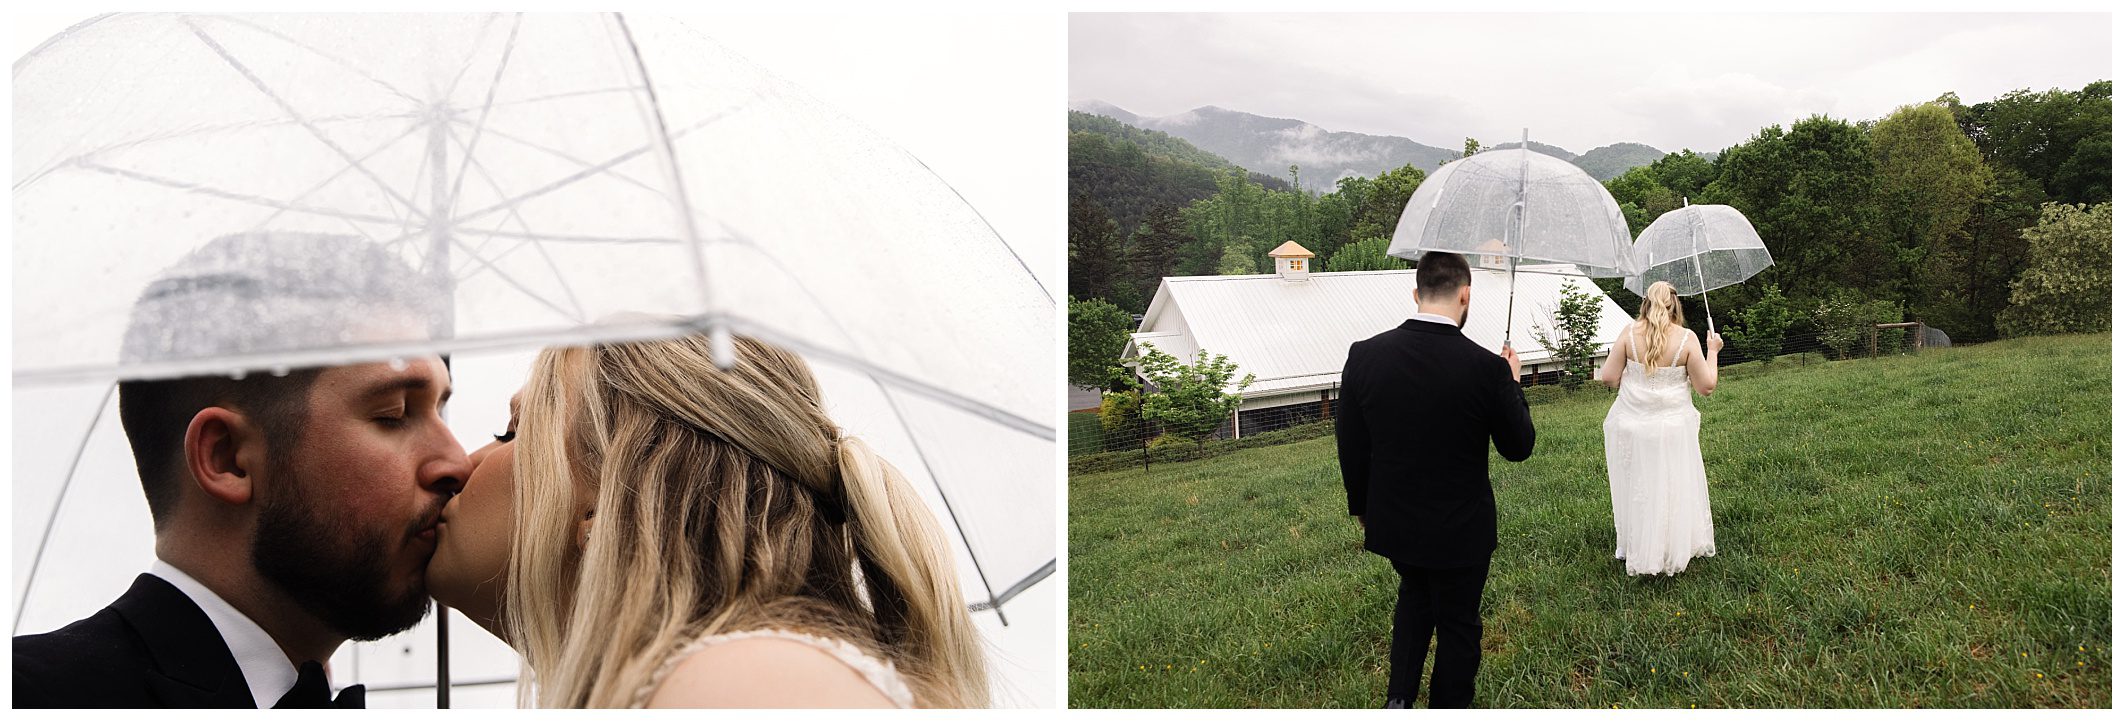 A bride and groom kiss under a clear umbrella with a natural mountain landscape backdrop, and walk away holding hands, each under their own umbrella, towards a distant white church at Chestnut Ridge.